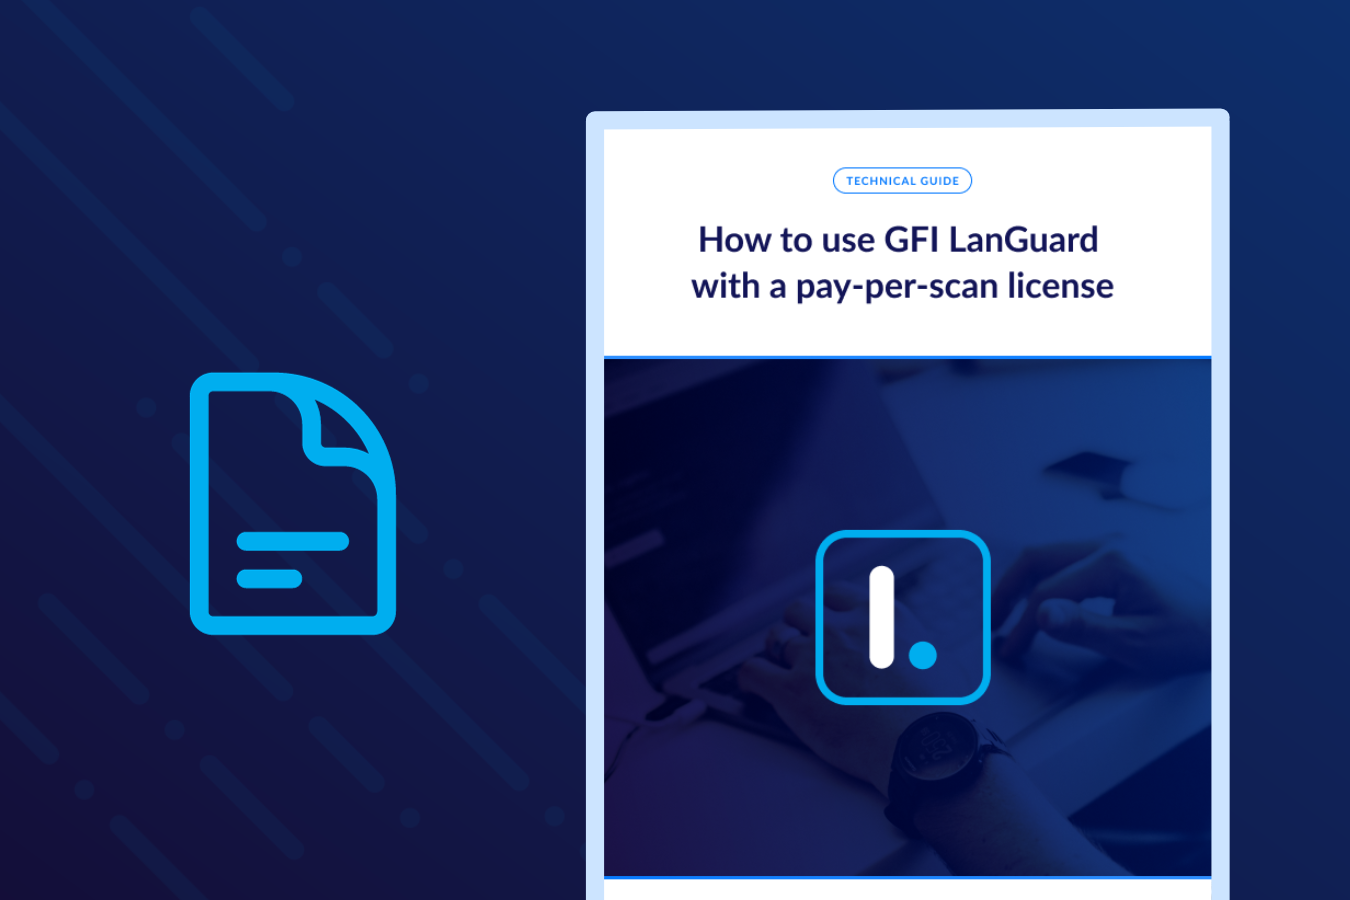 How to use GFI LanGuard with a pay-per-scan license